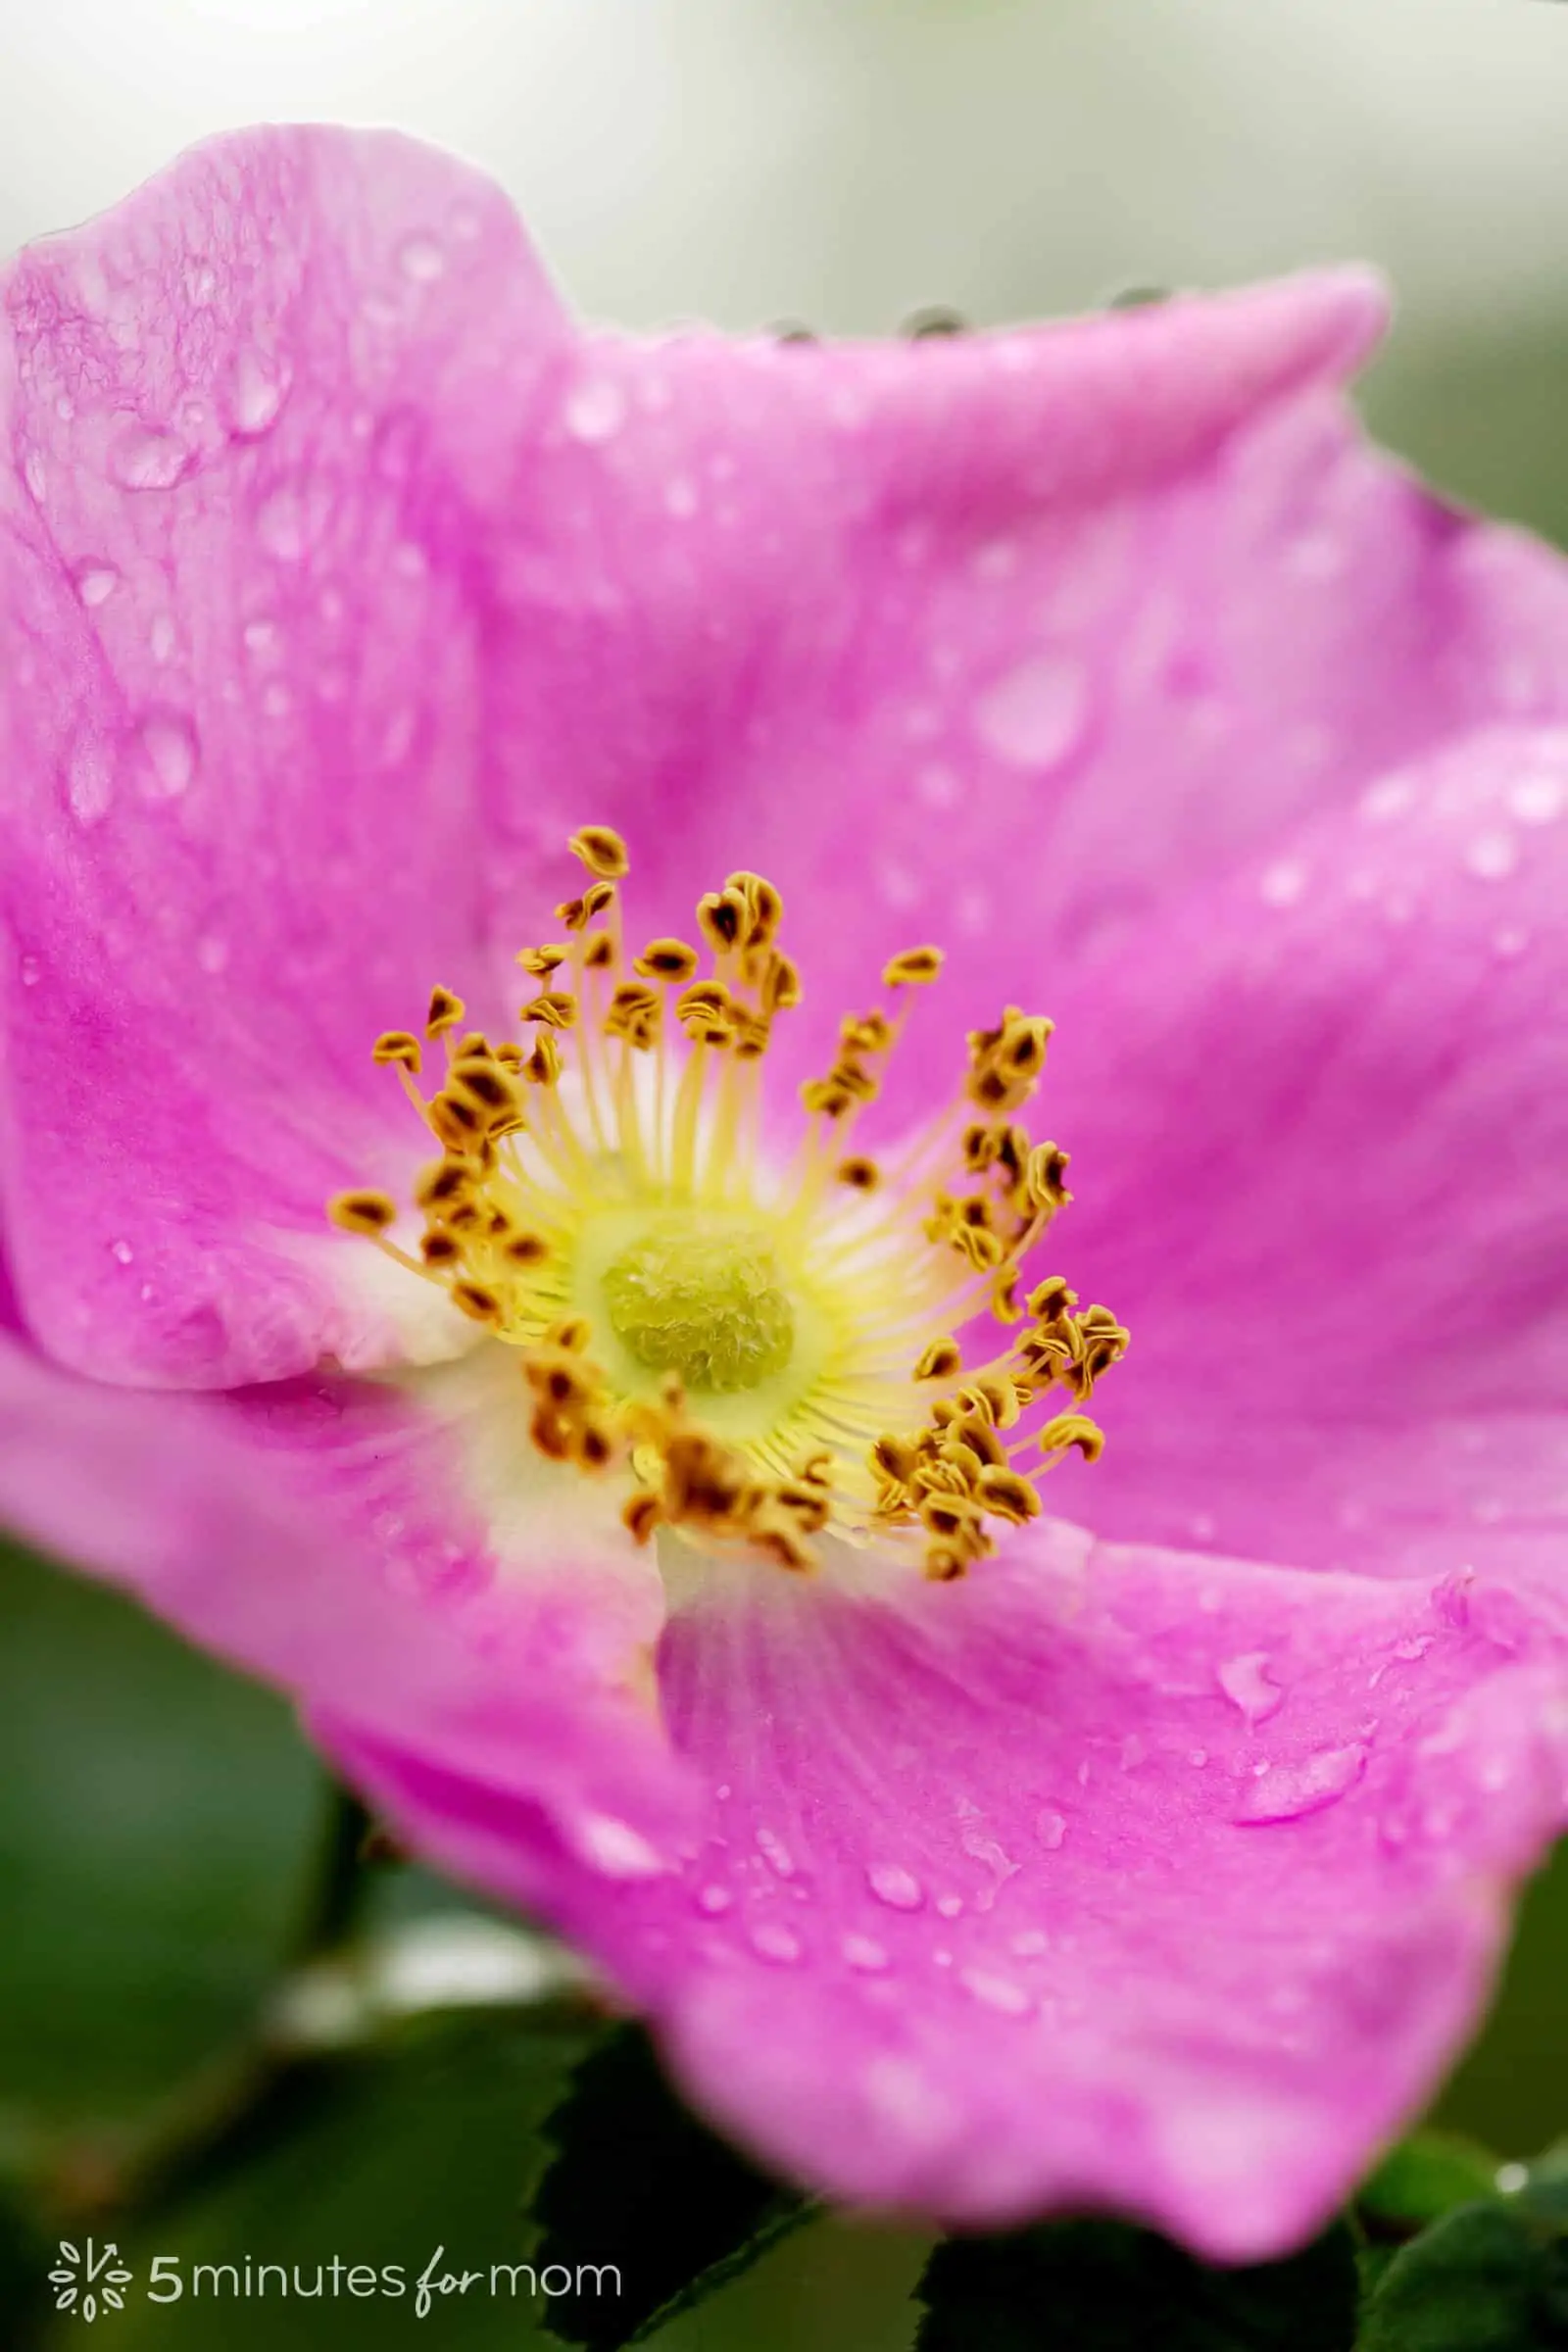 wild rose blossom with raindrops demonstrating flower photography